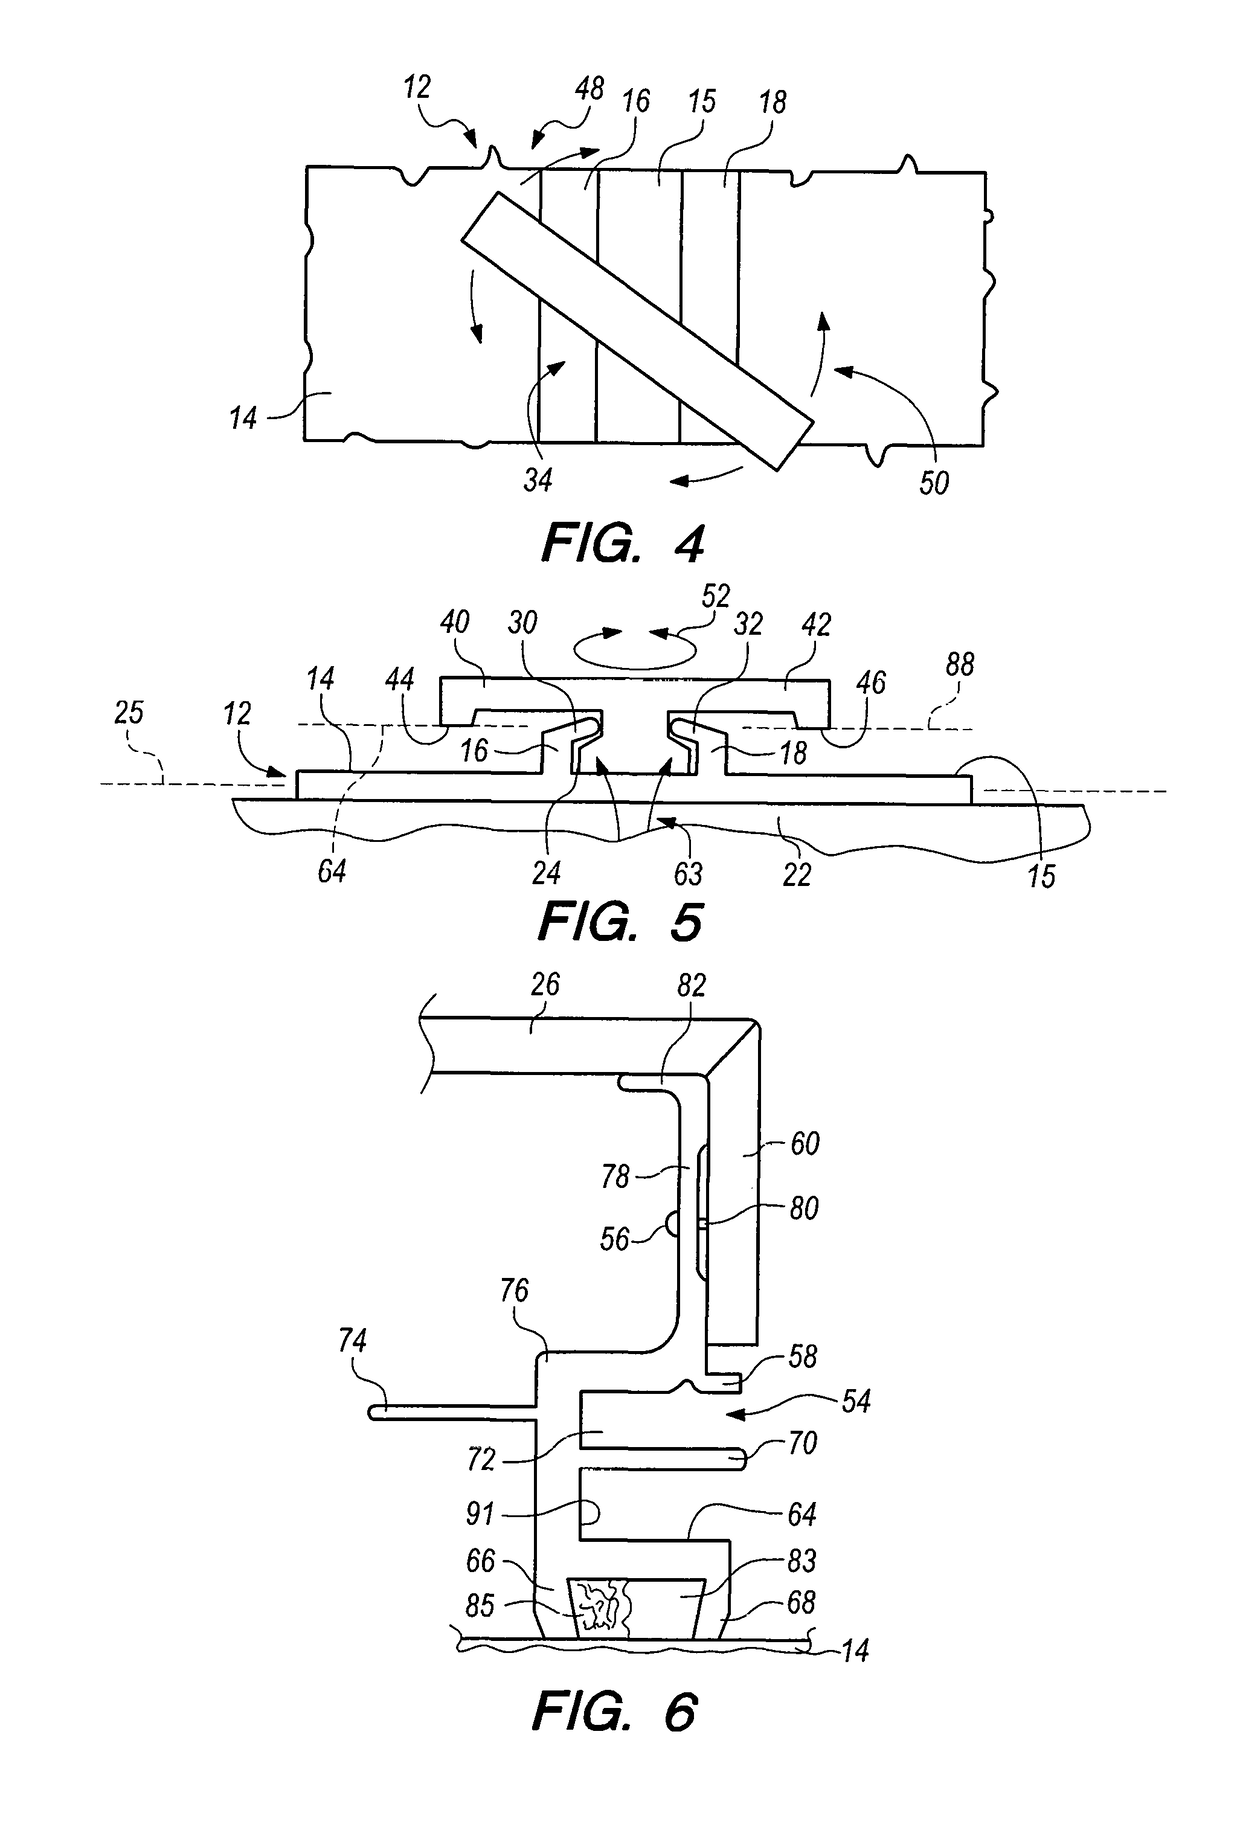 Apparatus for mounting a plurality of panels to a facade